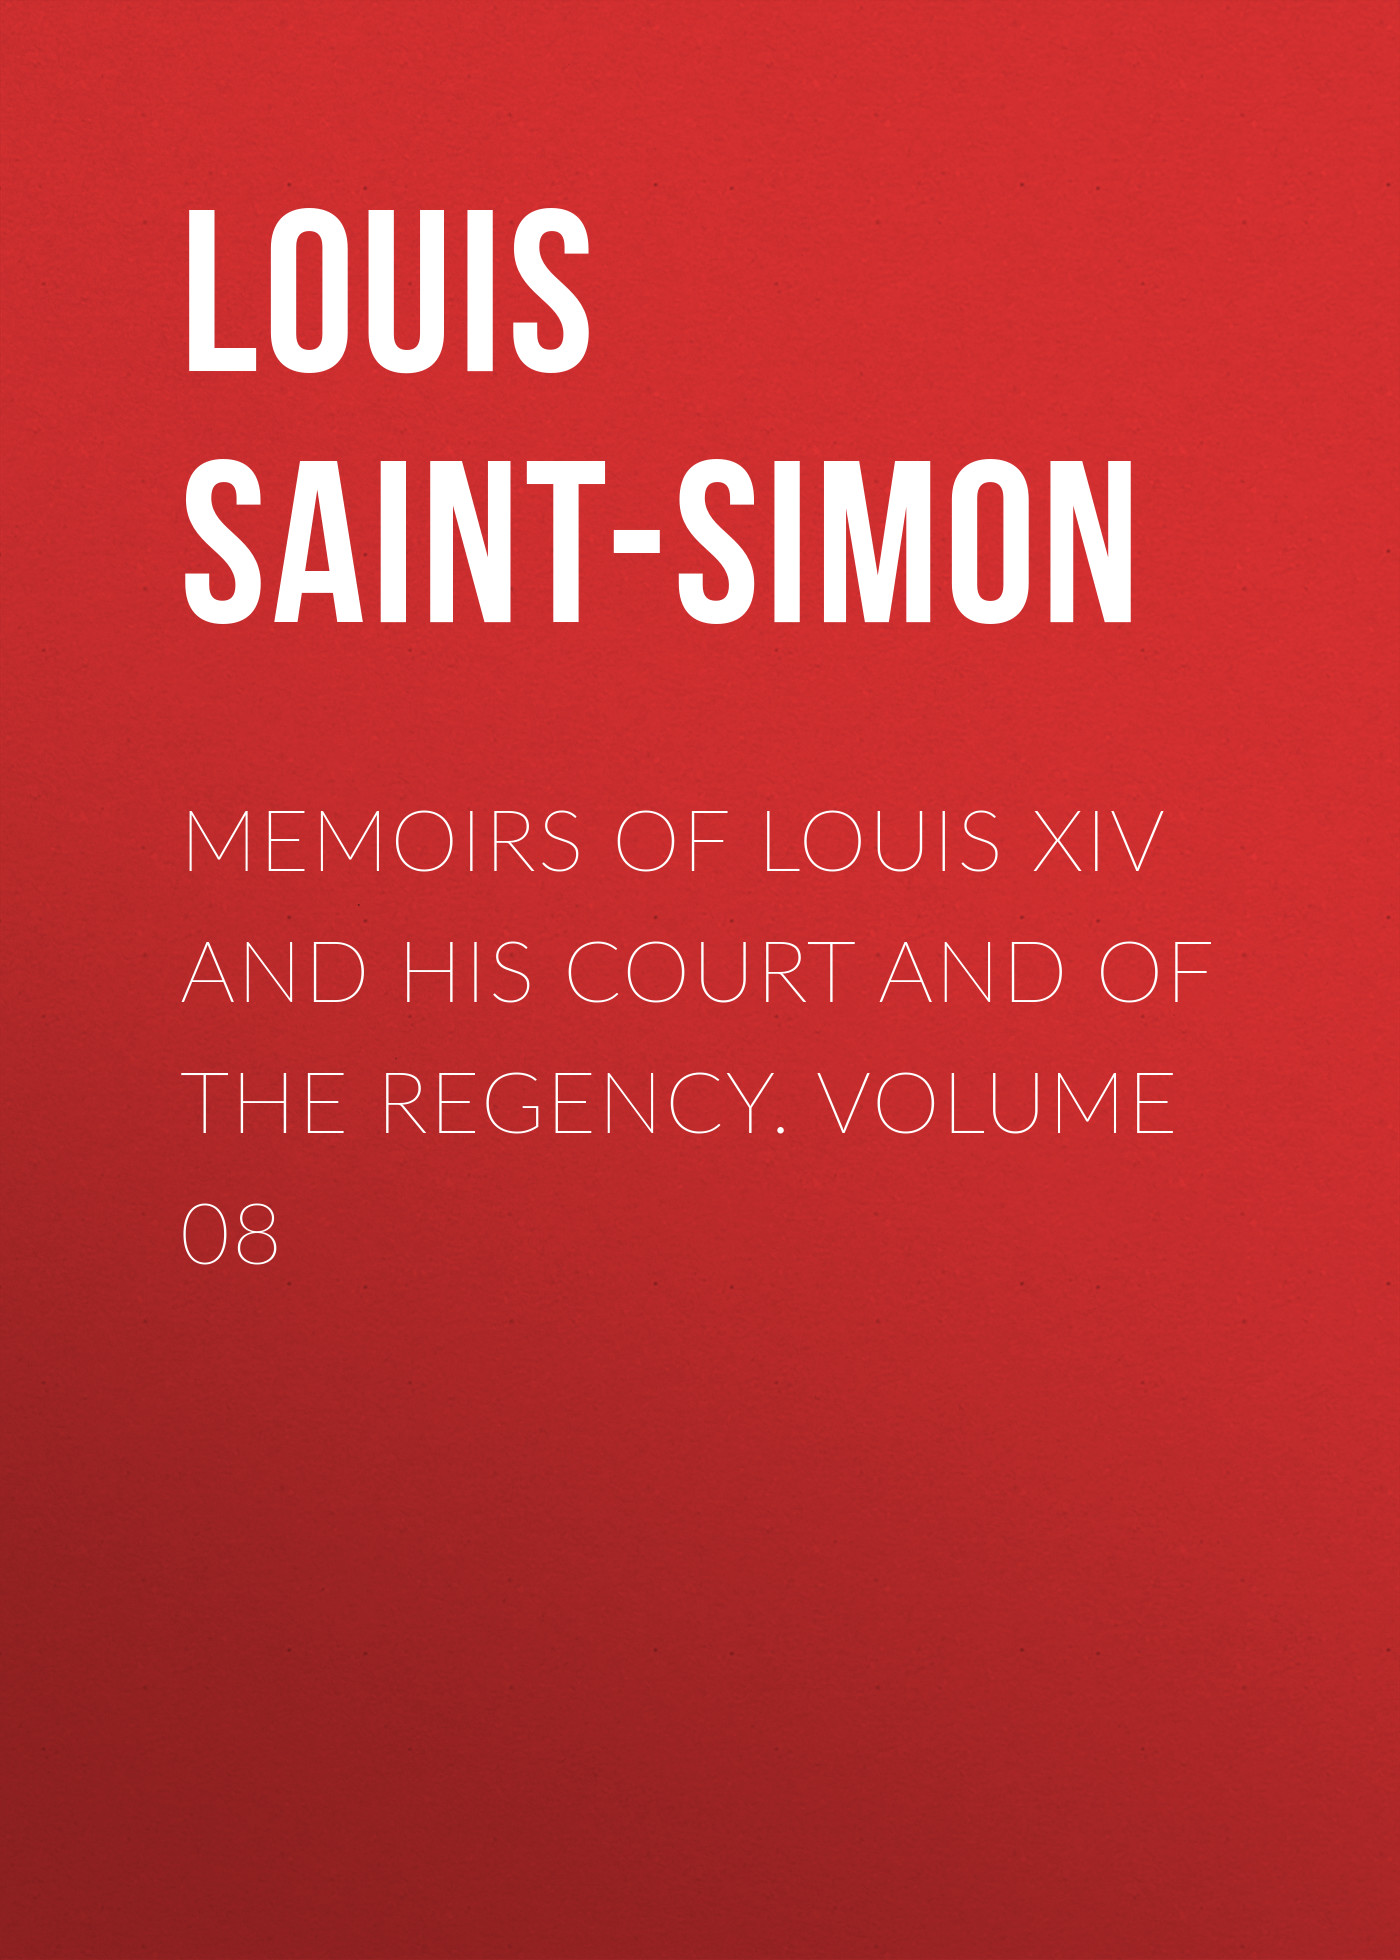 Memoirs of Louis XIV and His Court and of the Regency. Volume 08